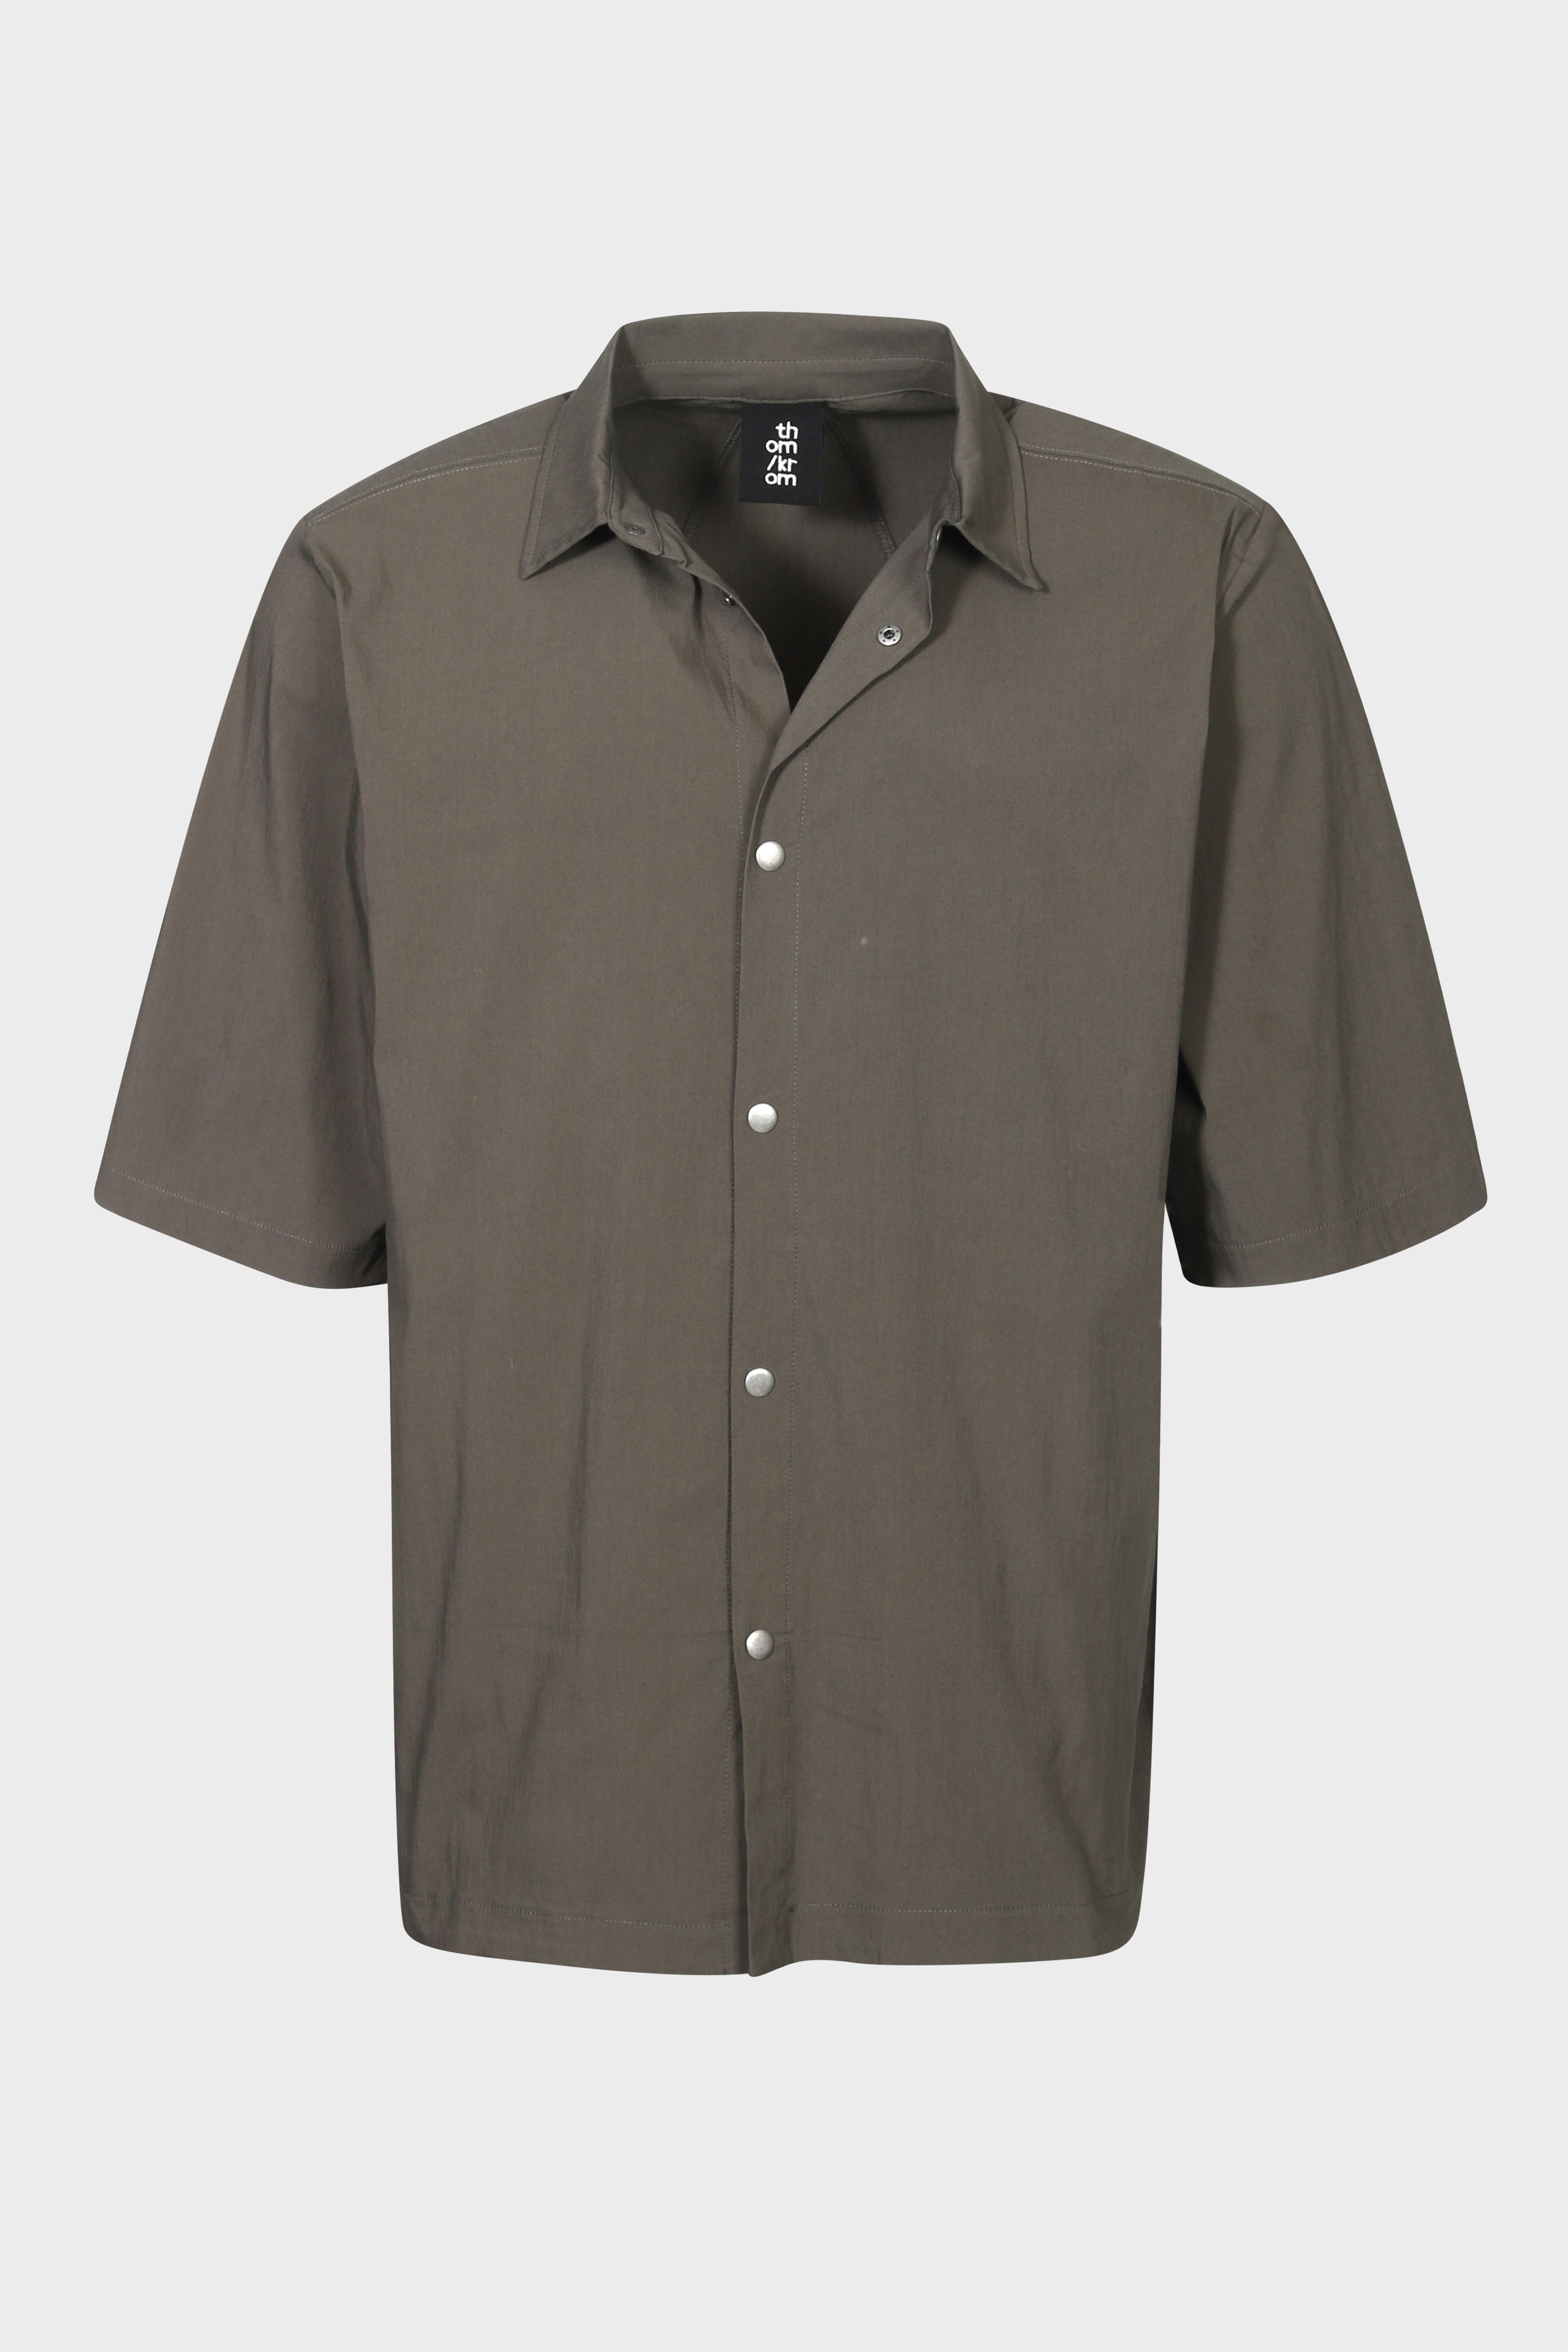 THOM KROM Shirt in Ivy Green S